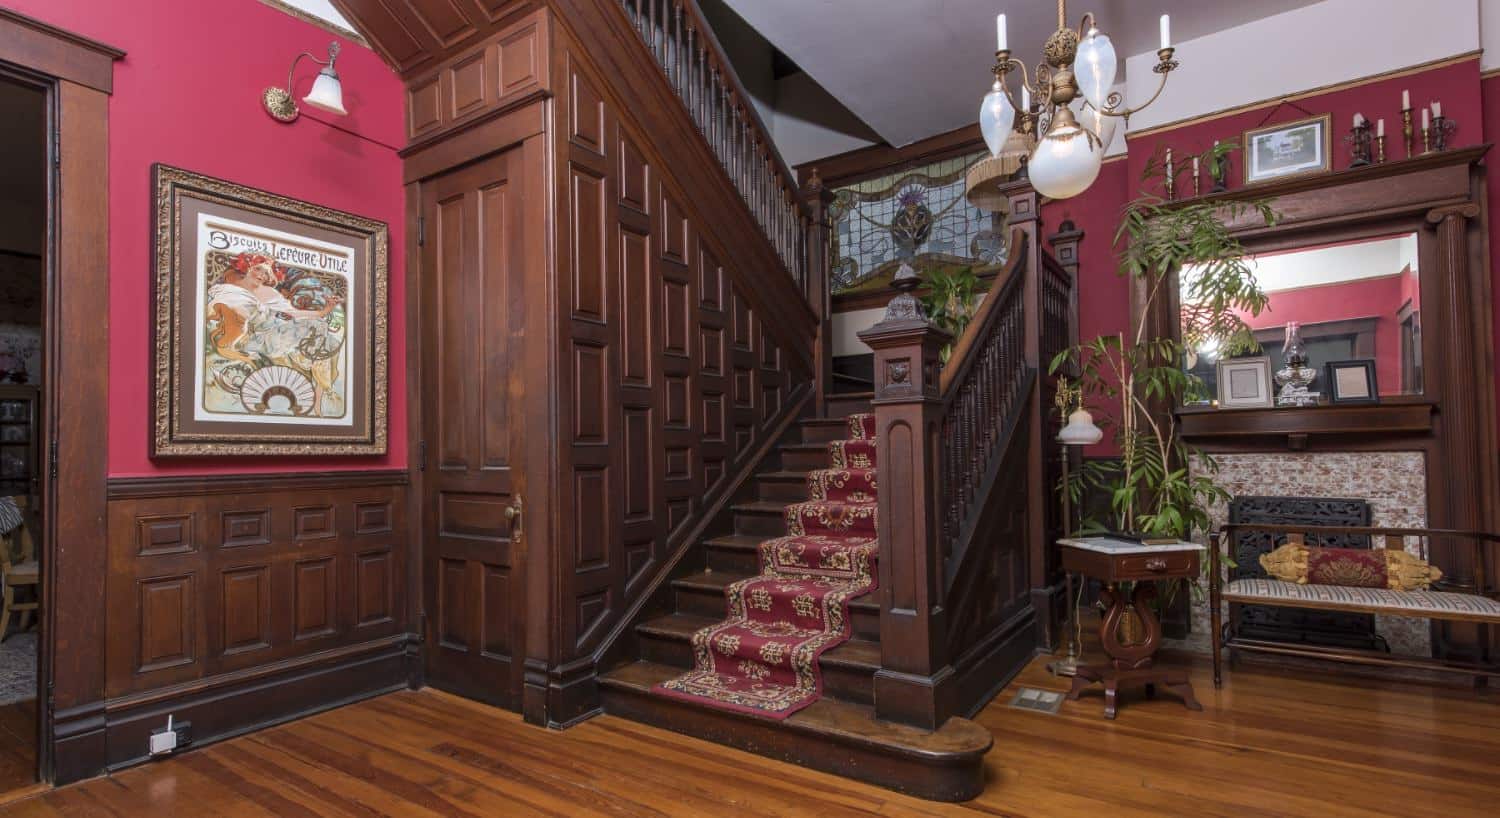 Large staircase with dark brown ornate wood railing and paneling with floral burgundy stair runner